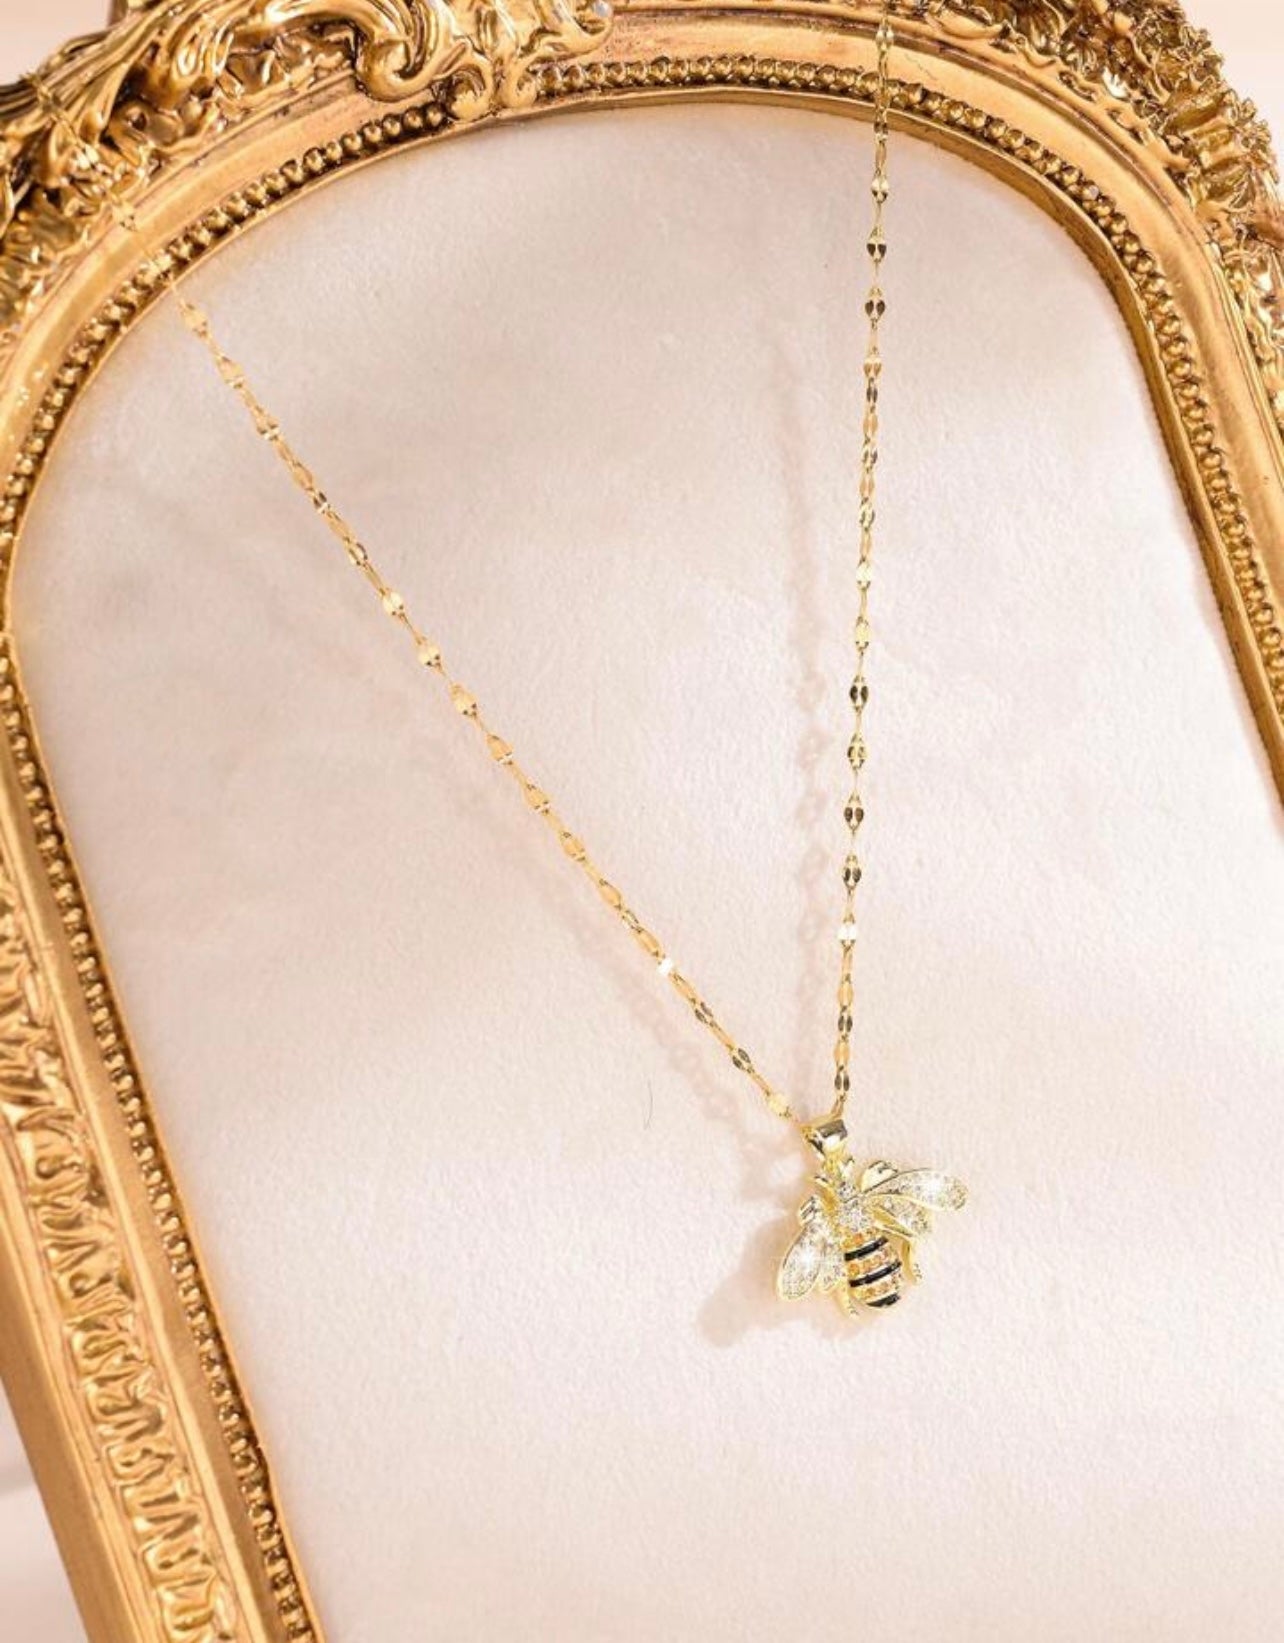 Beautiful Gold Bumble Bee Necklace